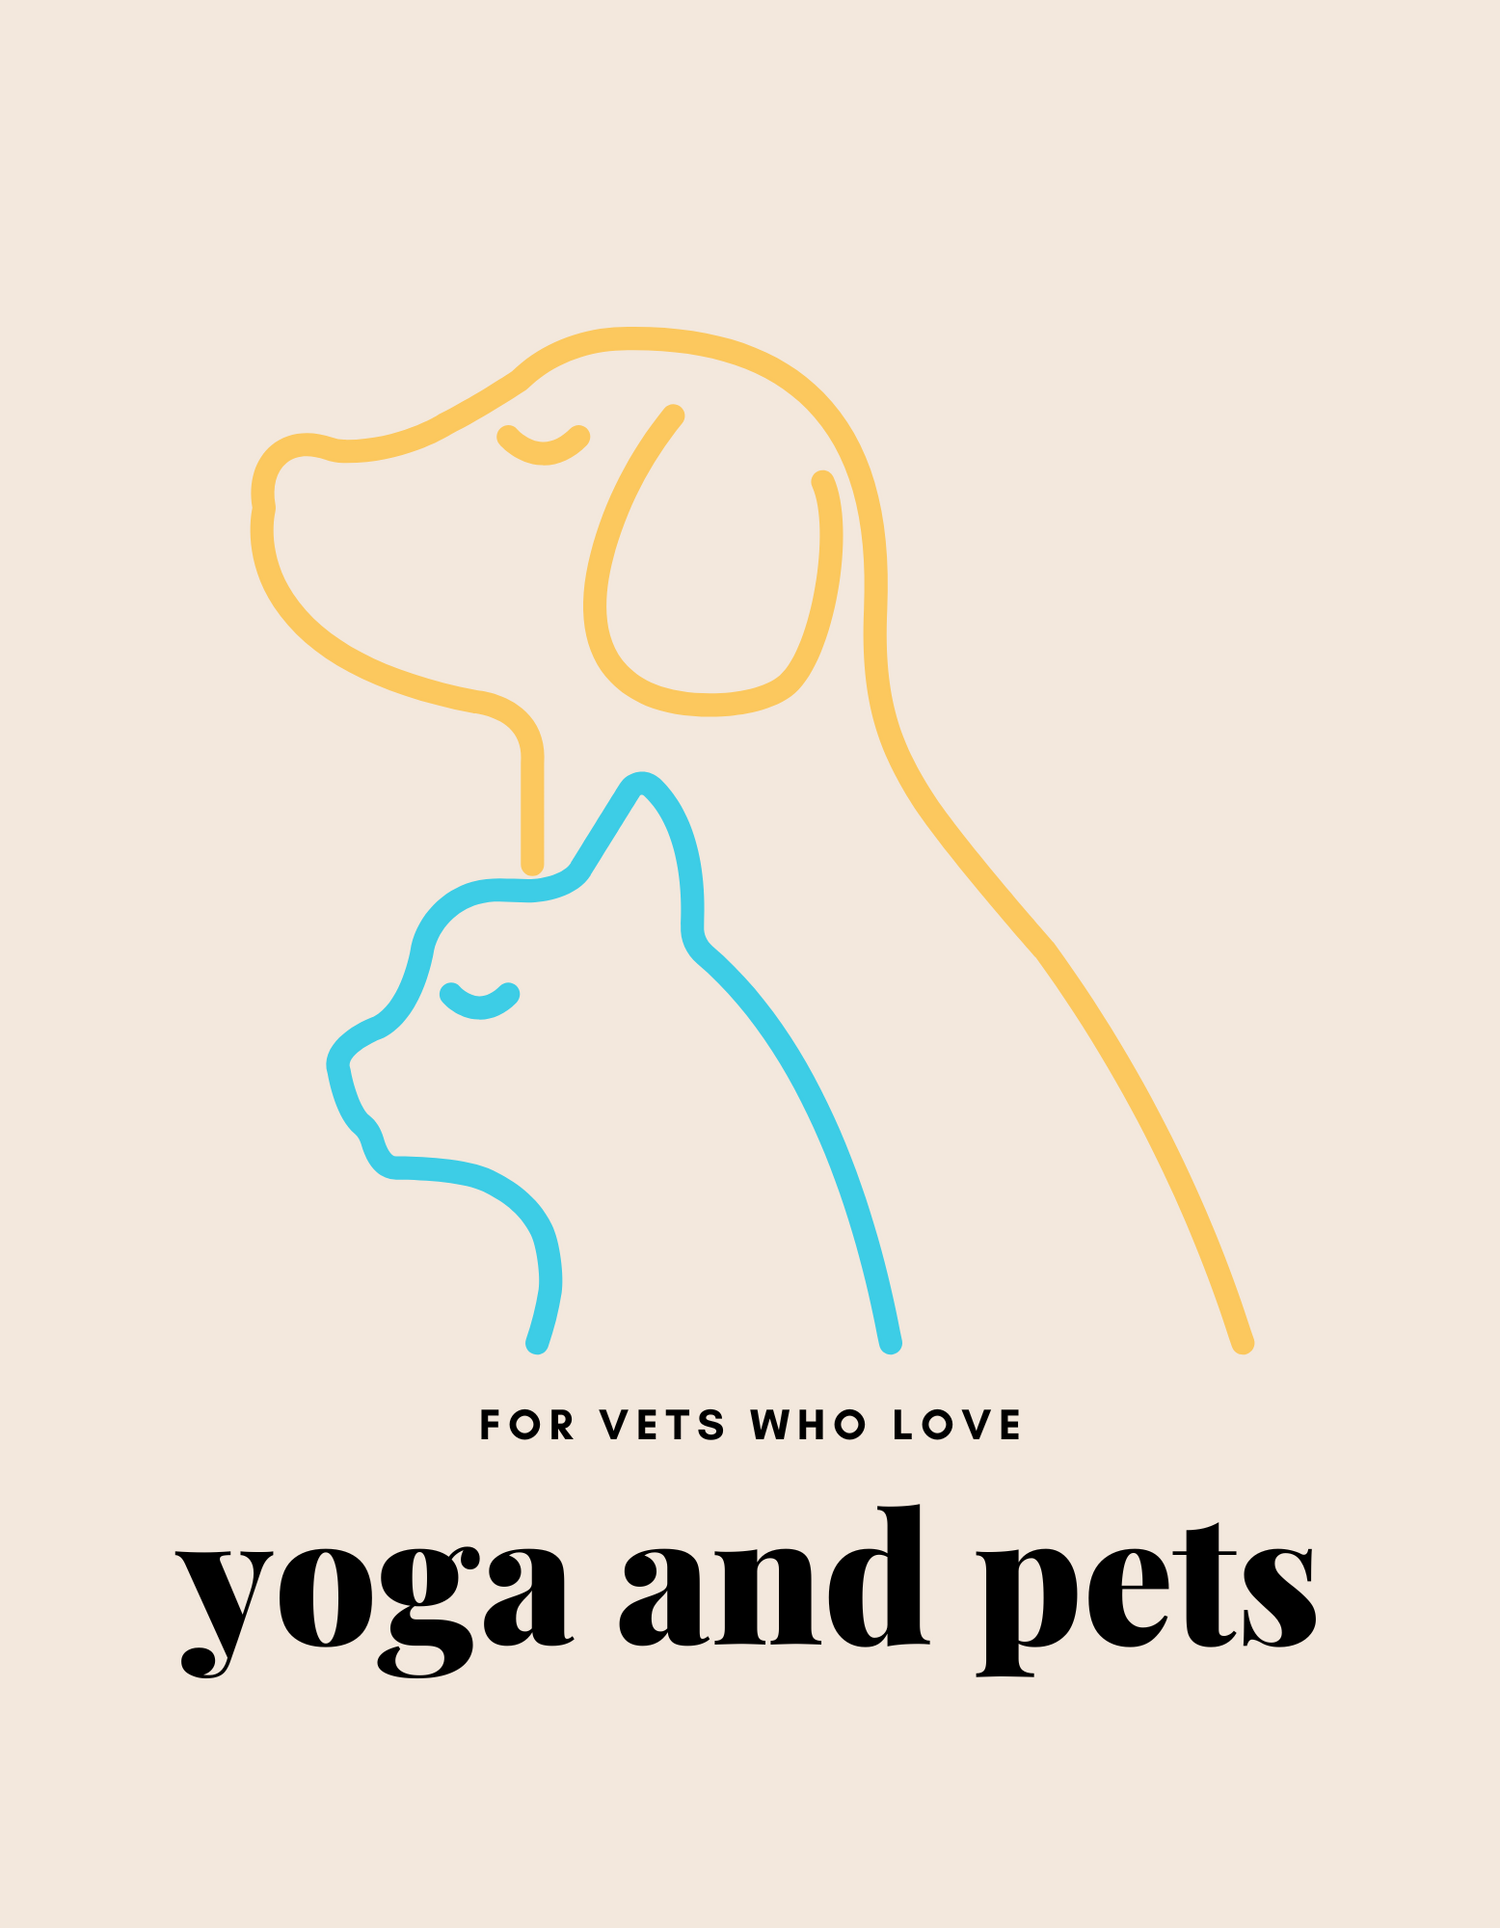 For vets who love yoga and pets